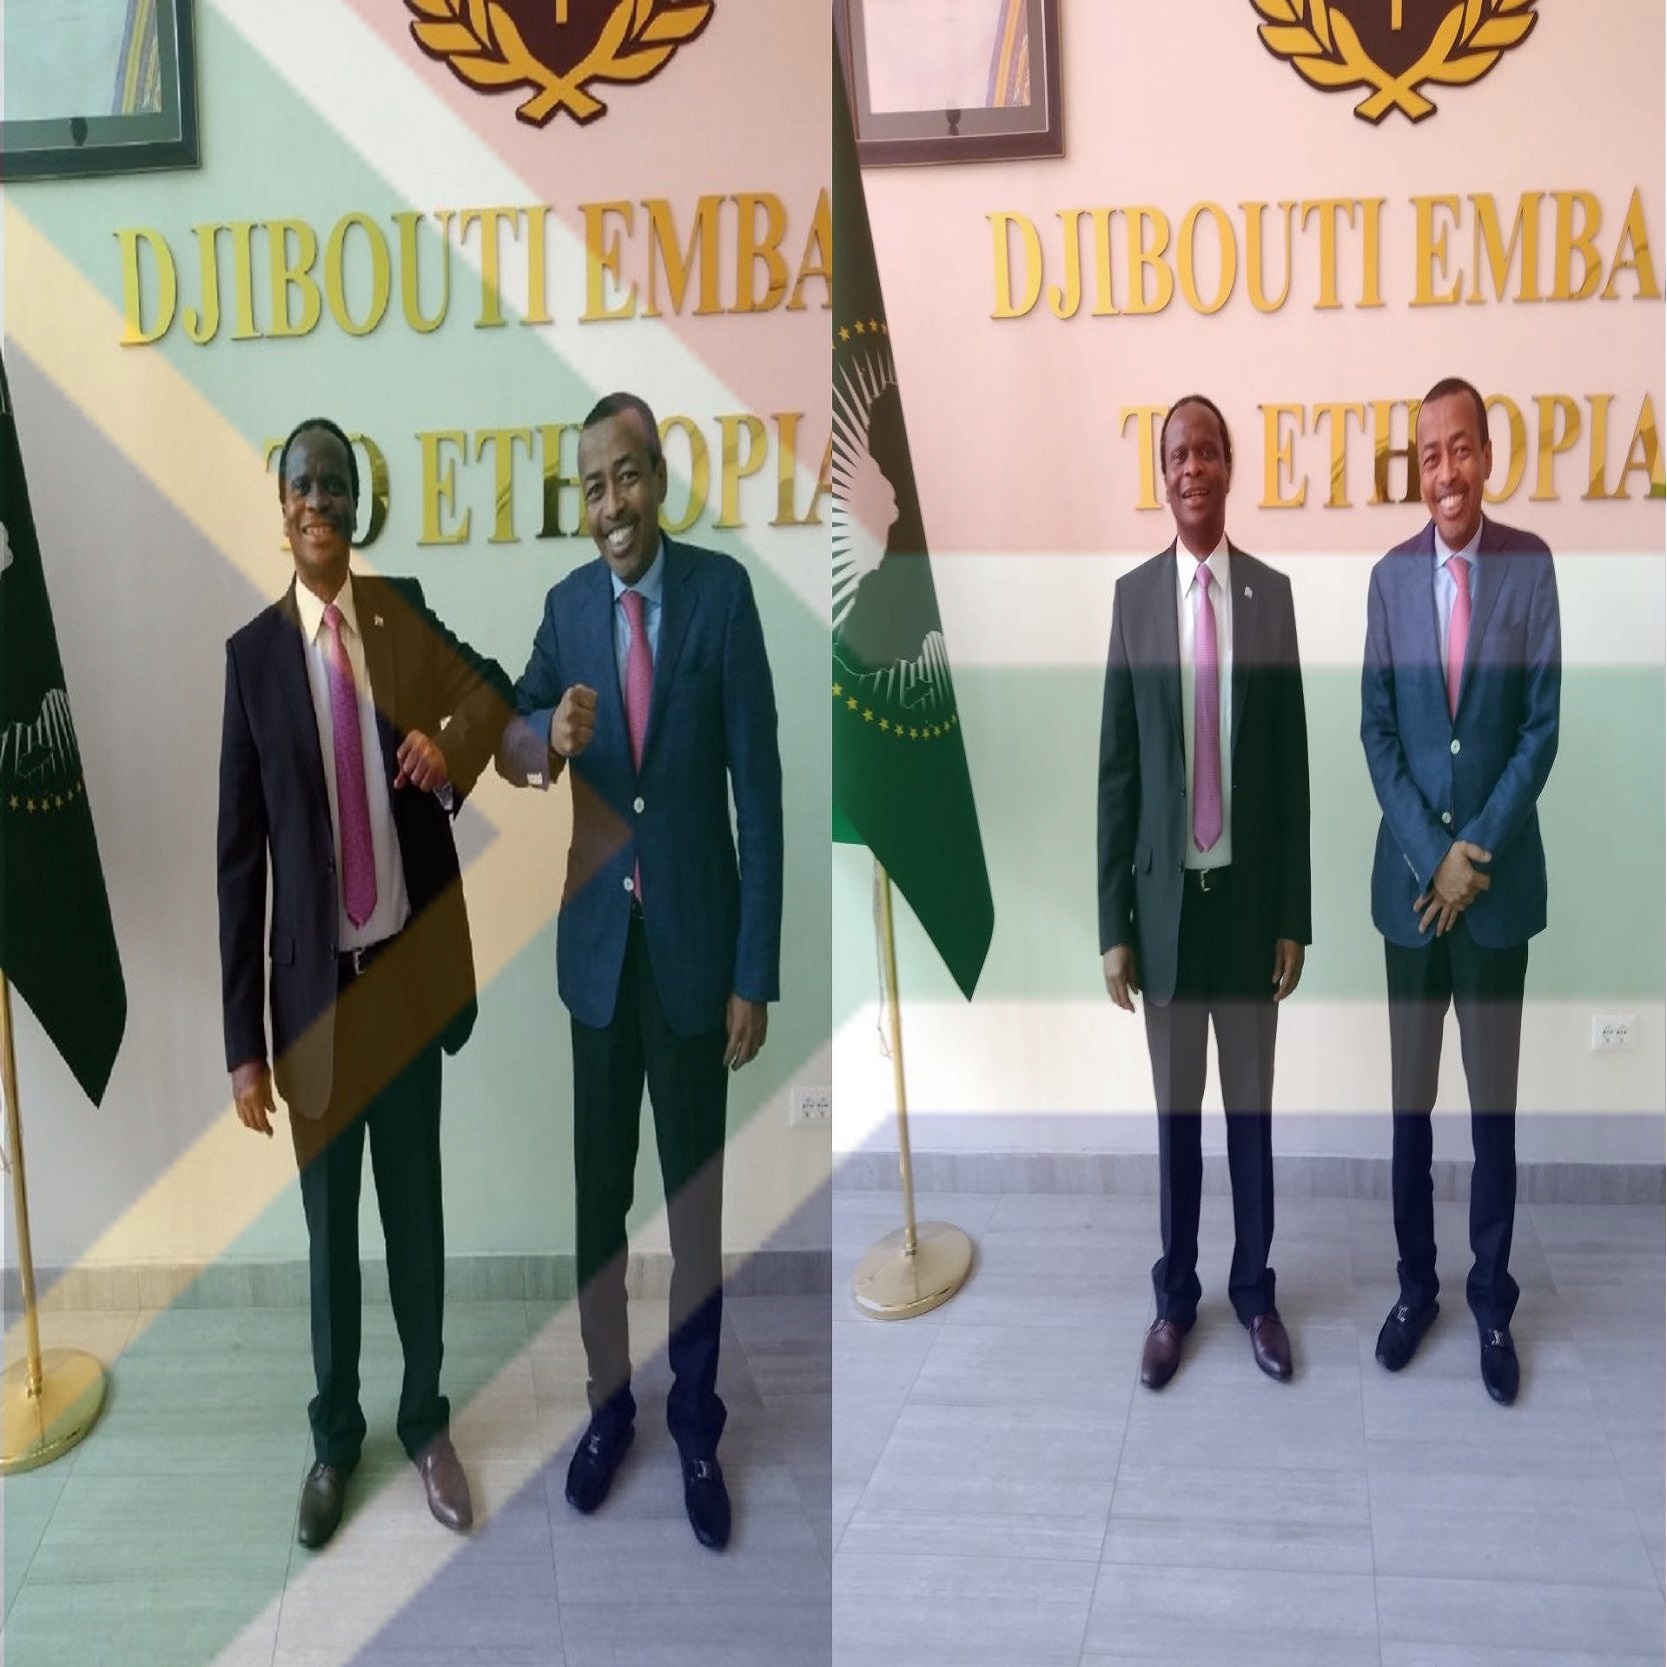 On 23 June 2021, H. E. Ambassador Edward Xolisa Makaya presented his Letters of Credence to the President of the Republic of Djibouti,  H.E. Ismail Omar Guelleh